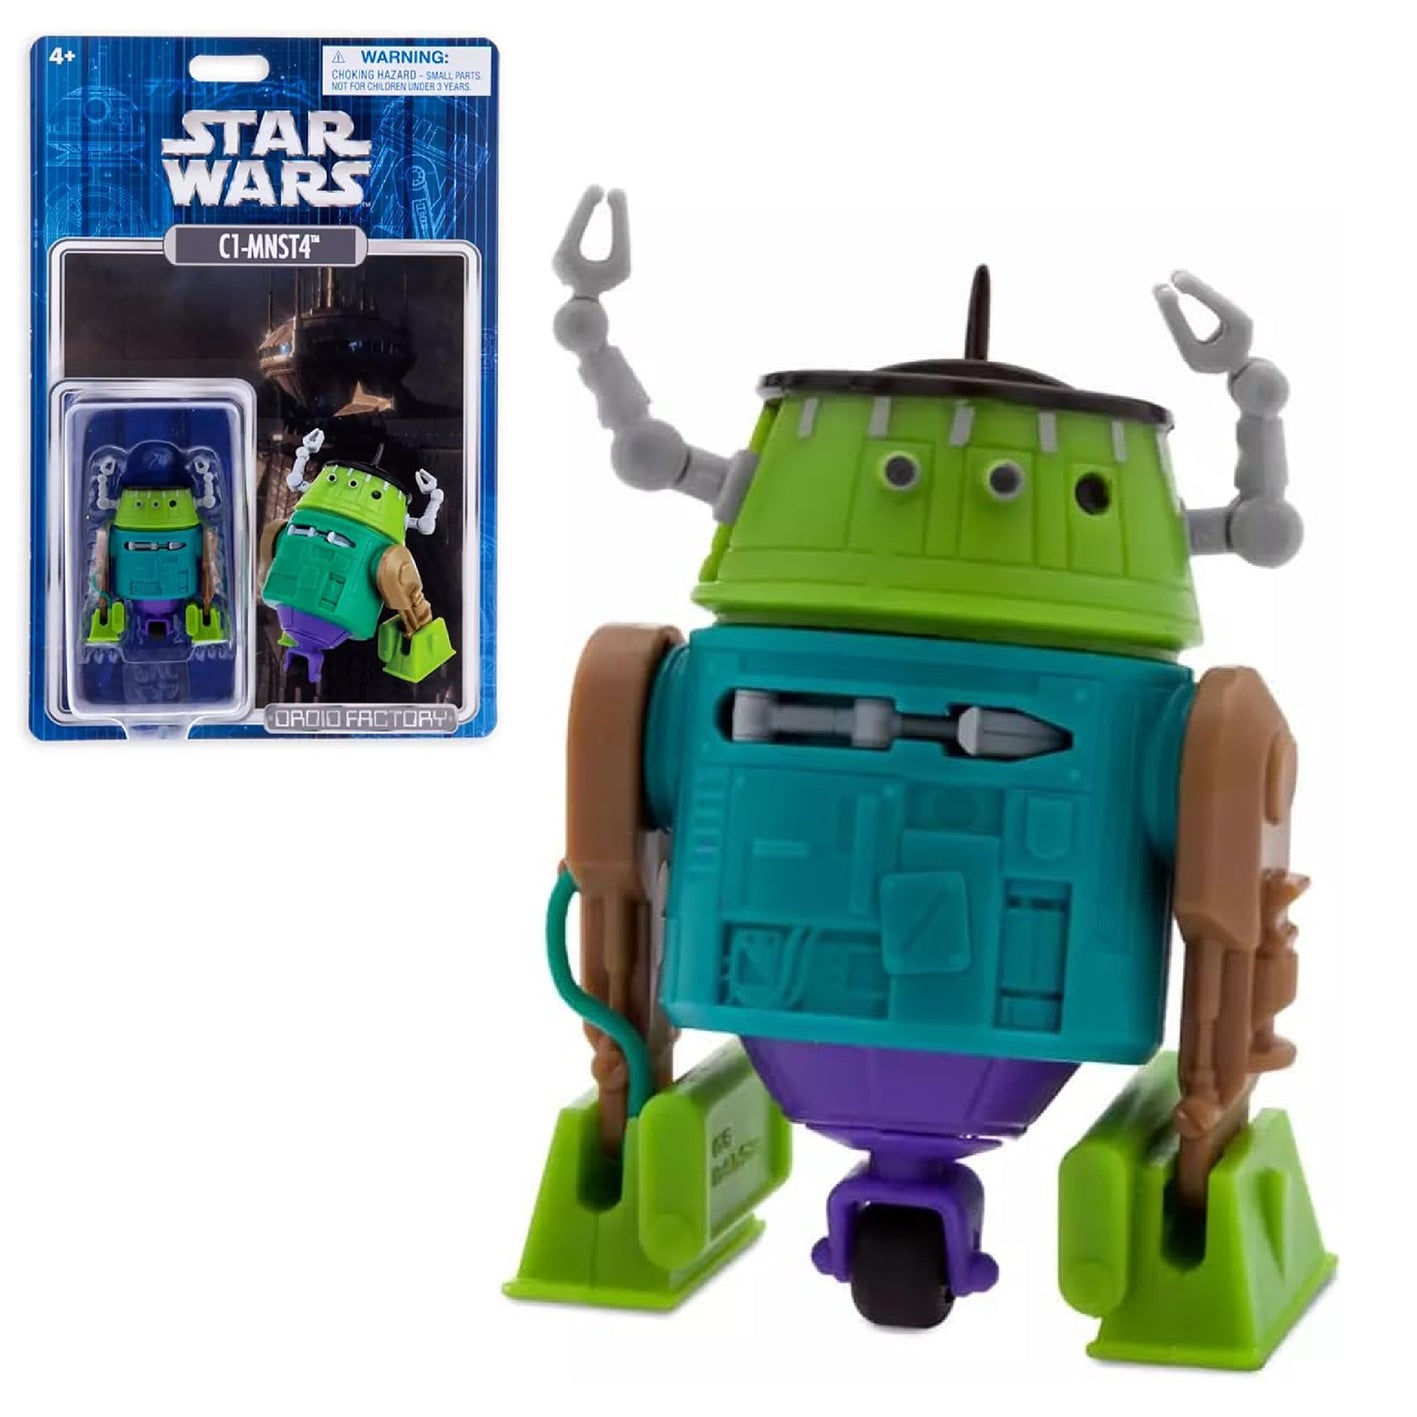 C1-MNST4 (Droid Factory), Star Wars: The Vintage Collection